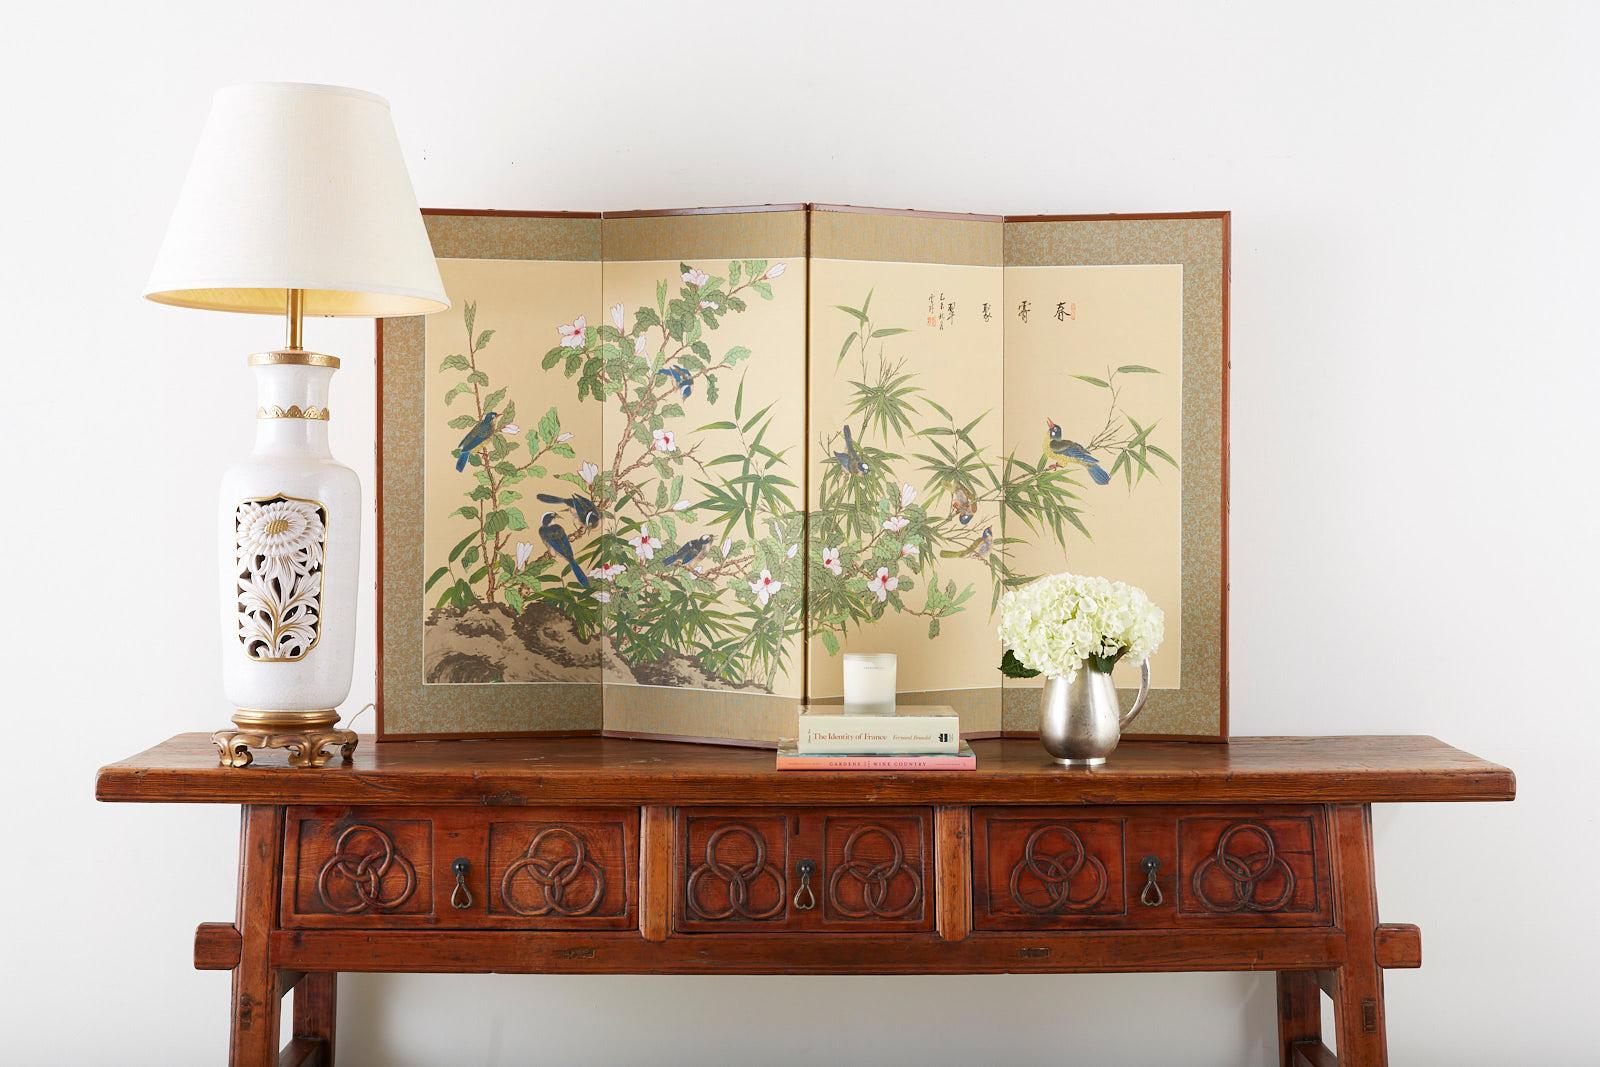 Gorgeous Japanese byobu style silk four-panel screen of flora and fauna. Vibrant spring green foliage and white flowers amid several indigo blue song birds. Signed and sealed on top right by artist Yuye with a cyclical date ji-wei autumn 1979 and